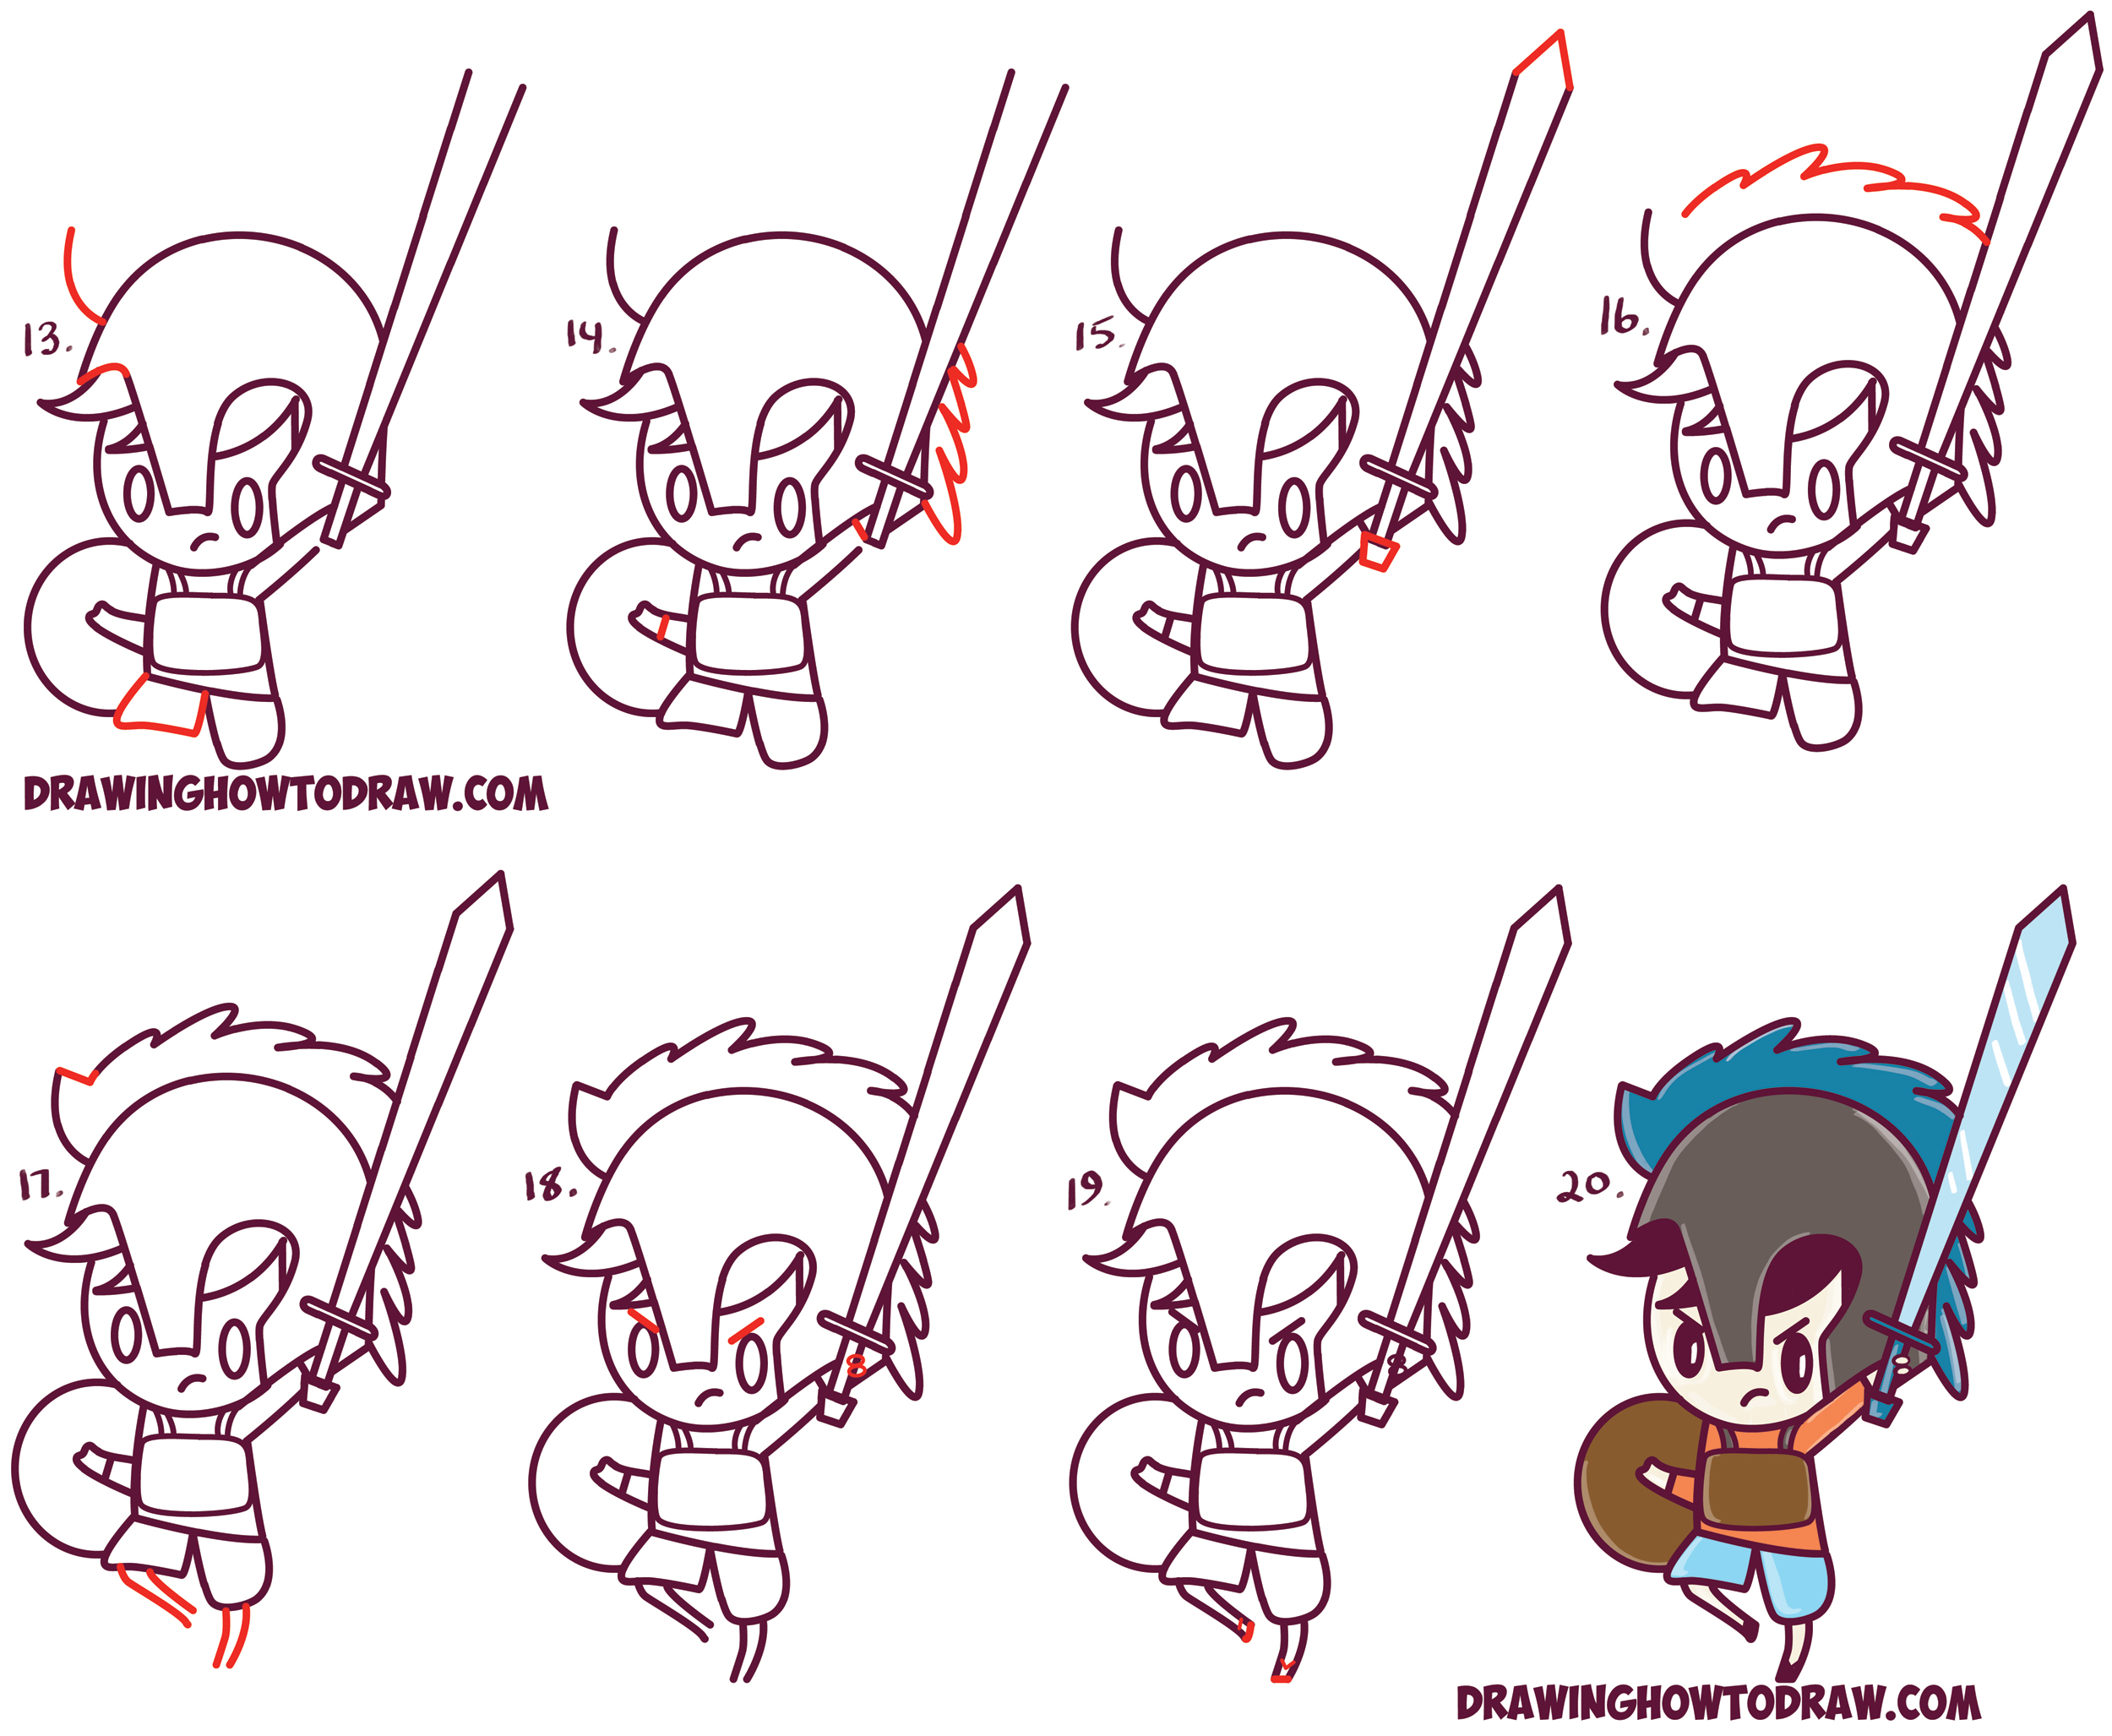 Learn How to Draw Percy Jackson (Cute / Cartoon / Chibi / Kawaii Style) in Simple Steps Drawing Lesson for Beginners